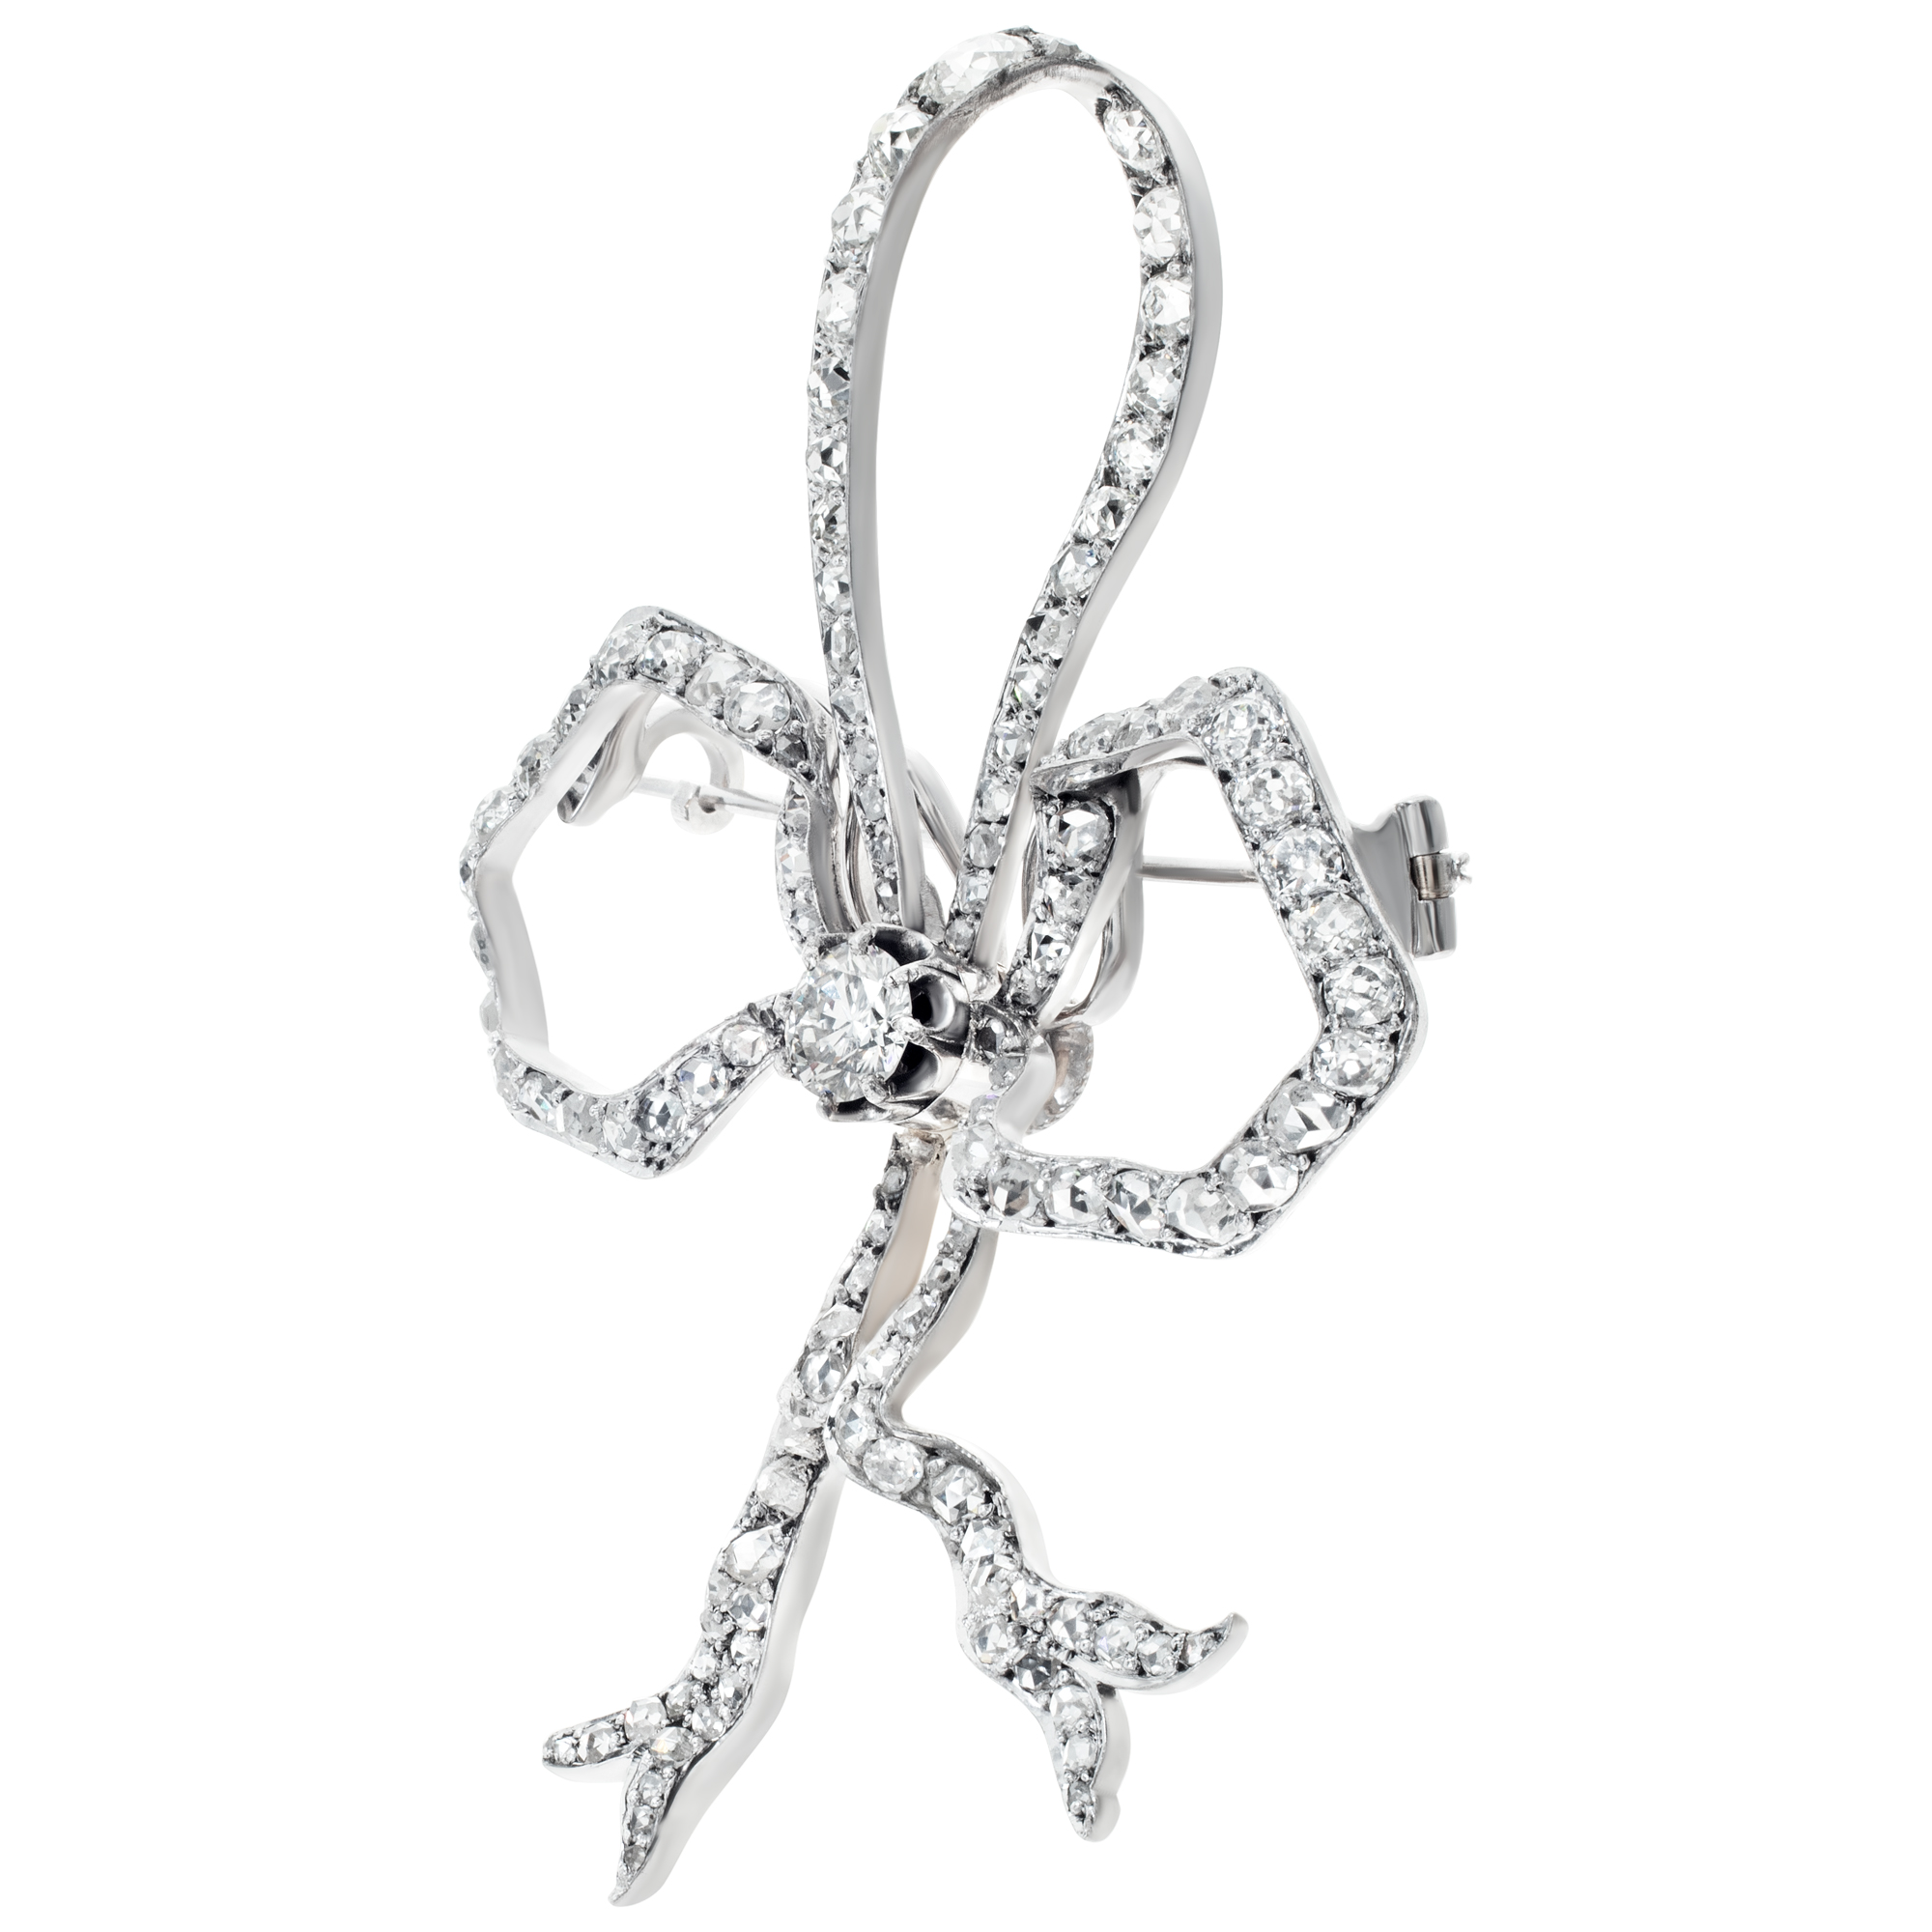 Diamond brooch in 18k white gold with 1 ct center rose cut diamond image 2